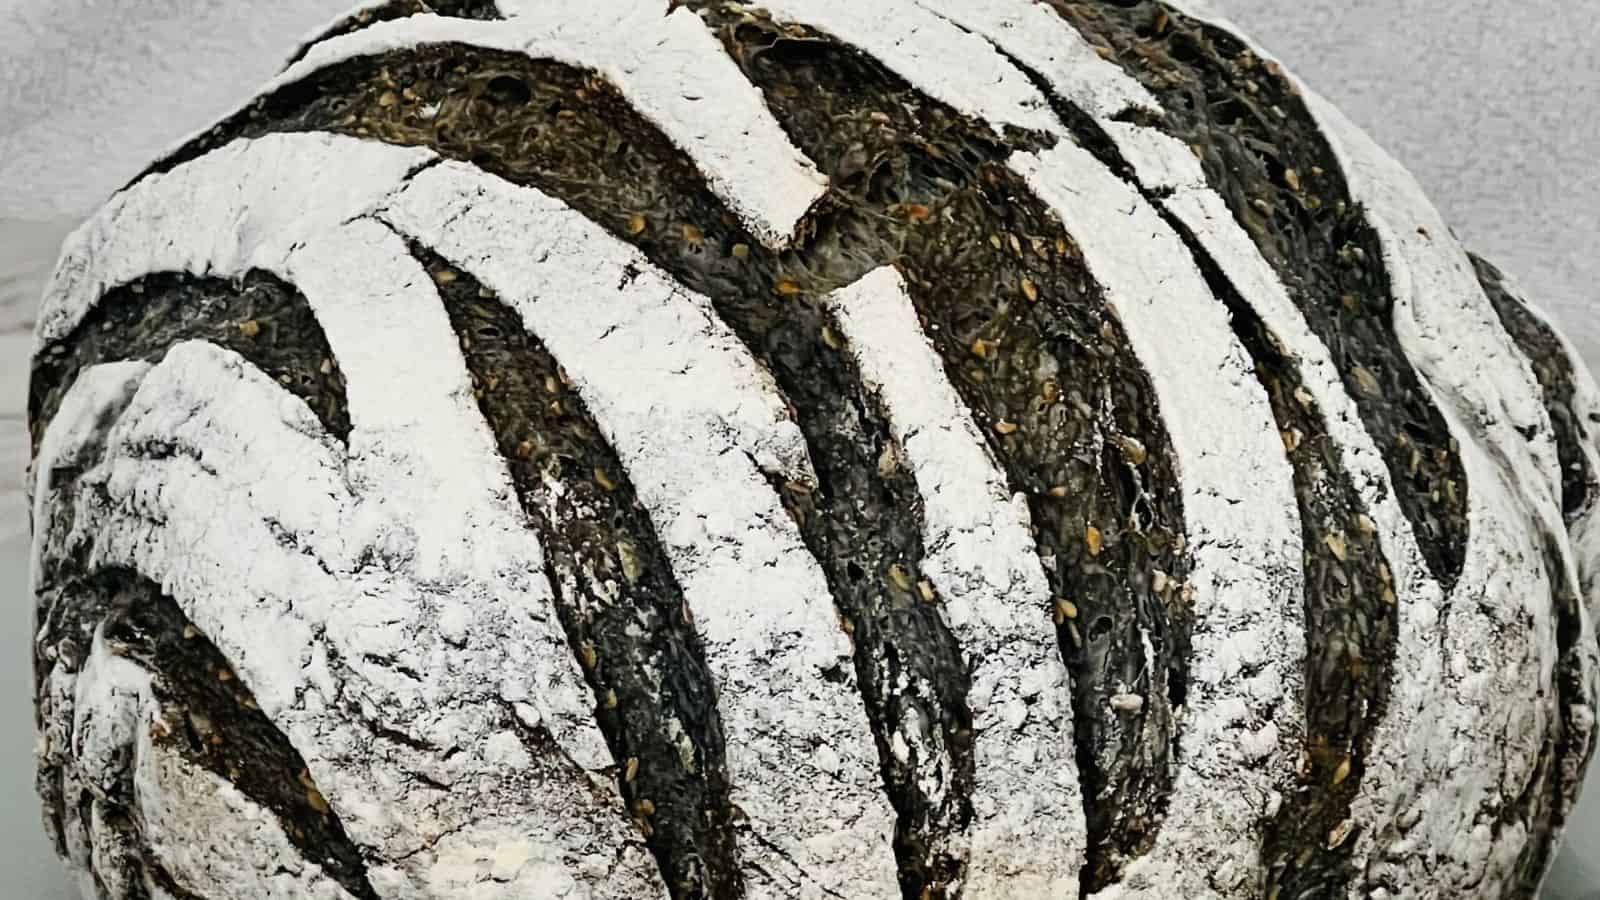 A close-up of a round loaf of bread with a dark crust and white flour stripes, giving a zebra-like pattern.